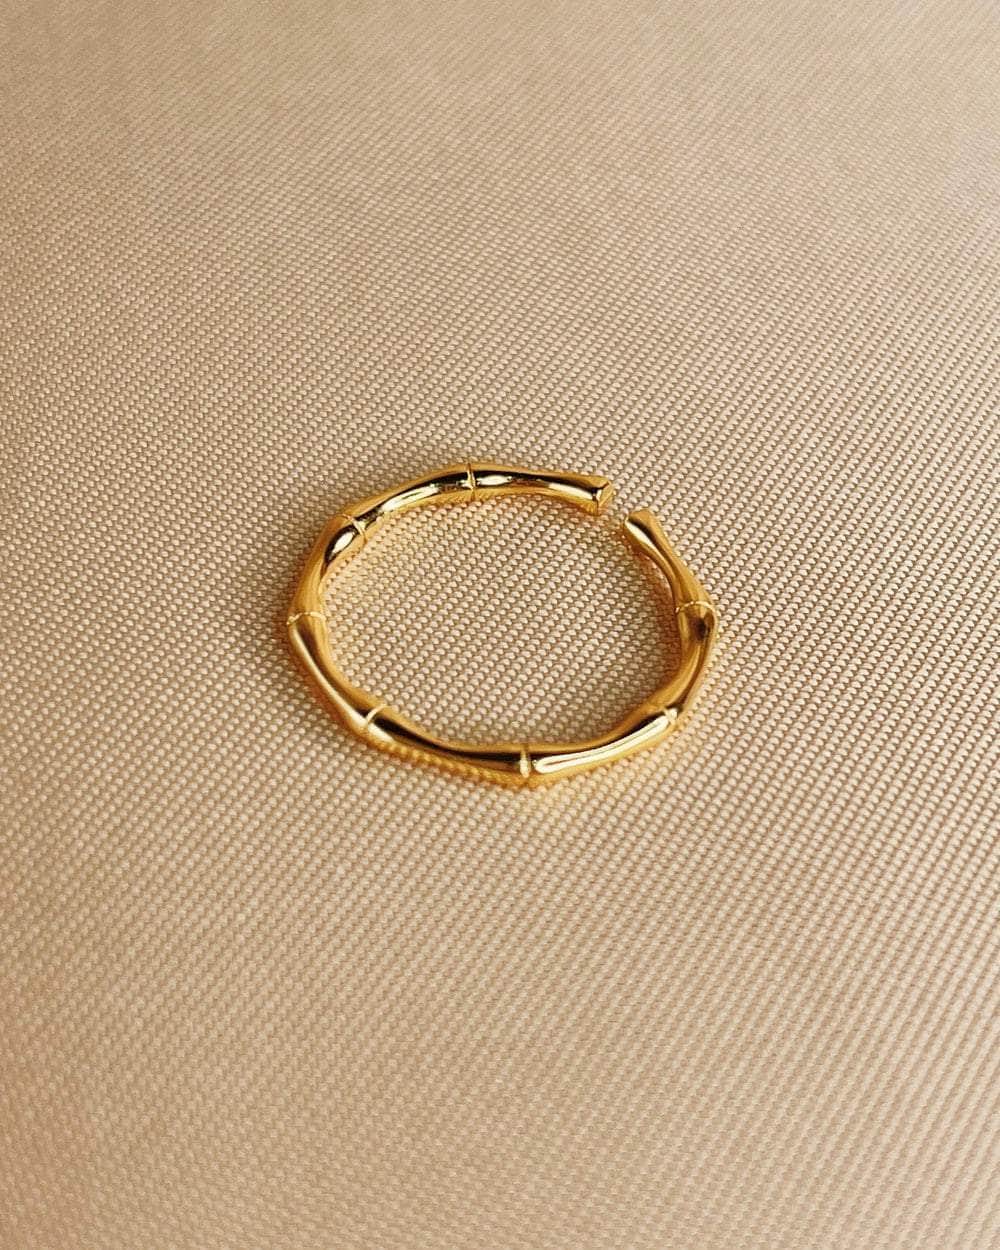 So Dainty Co. Rings Mila Gold Ring Gold Plated 925 Sterling Silver Jewelry